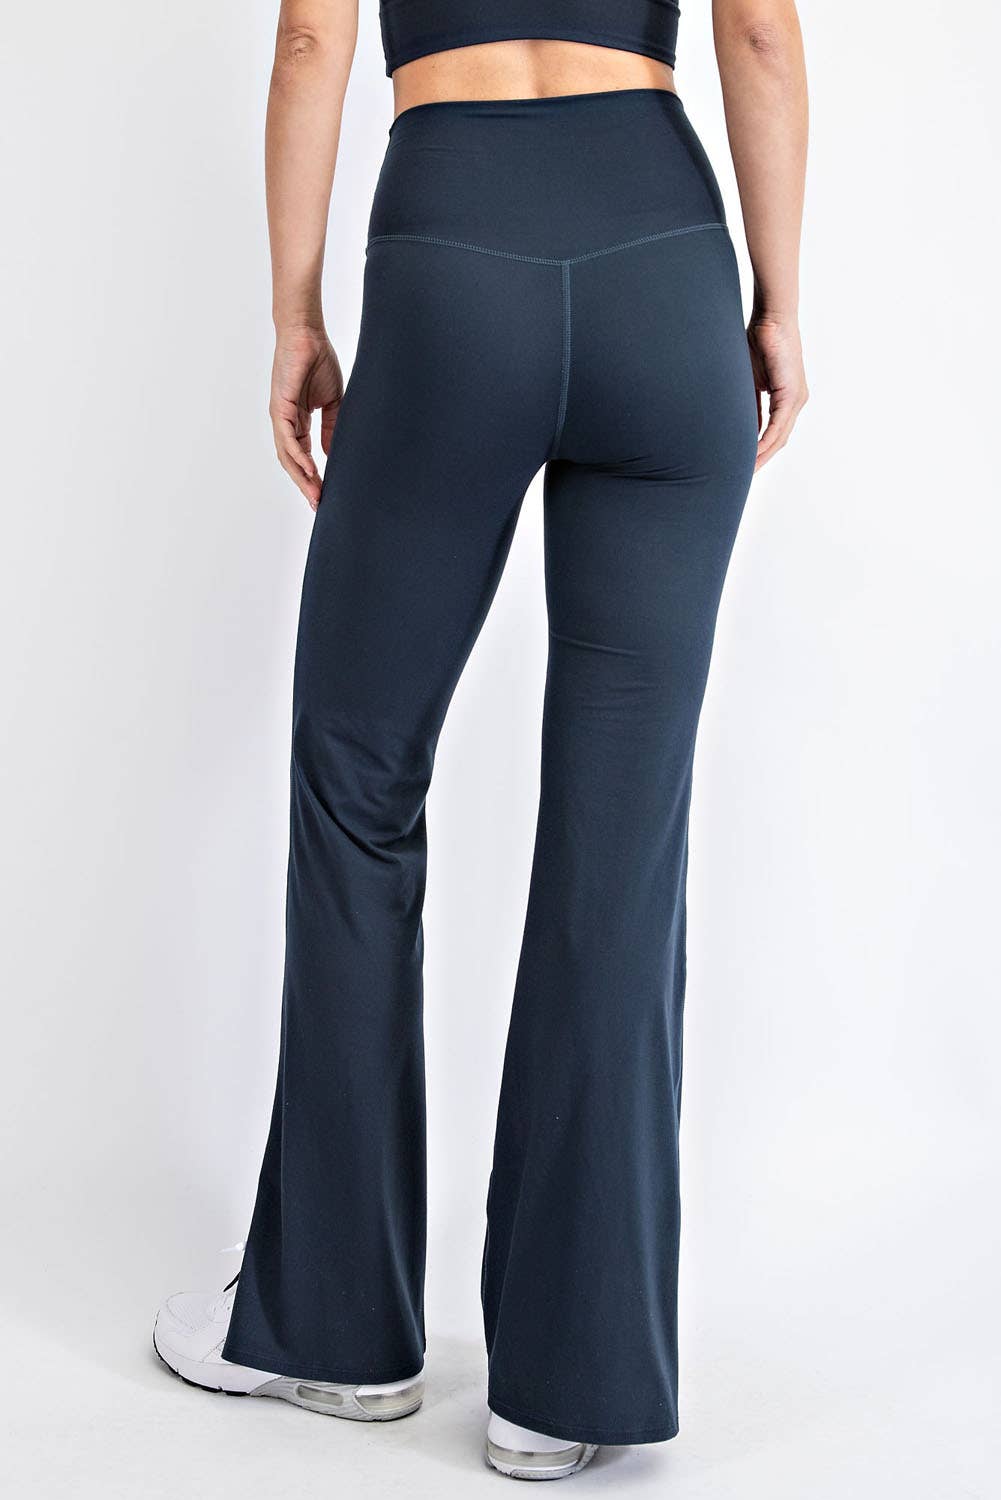 Butter Soft Yoga Pants With Pockets – MILA MACE